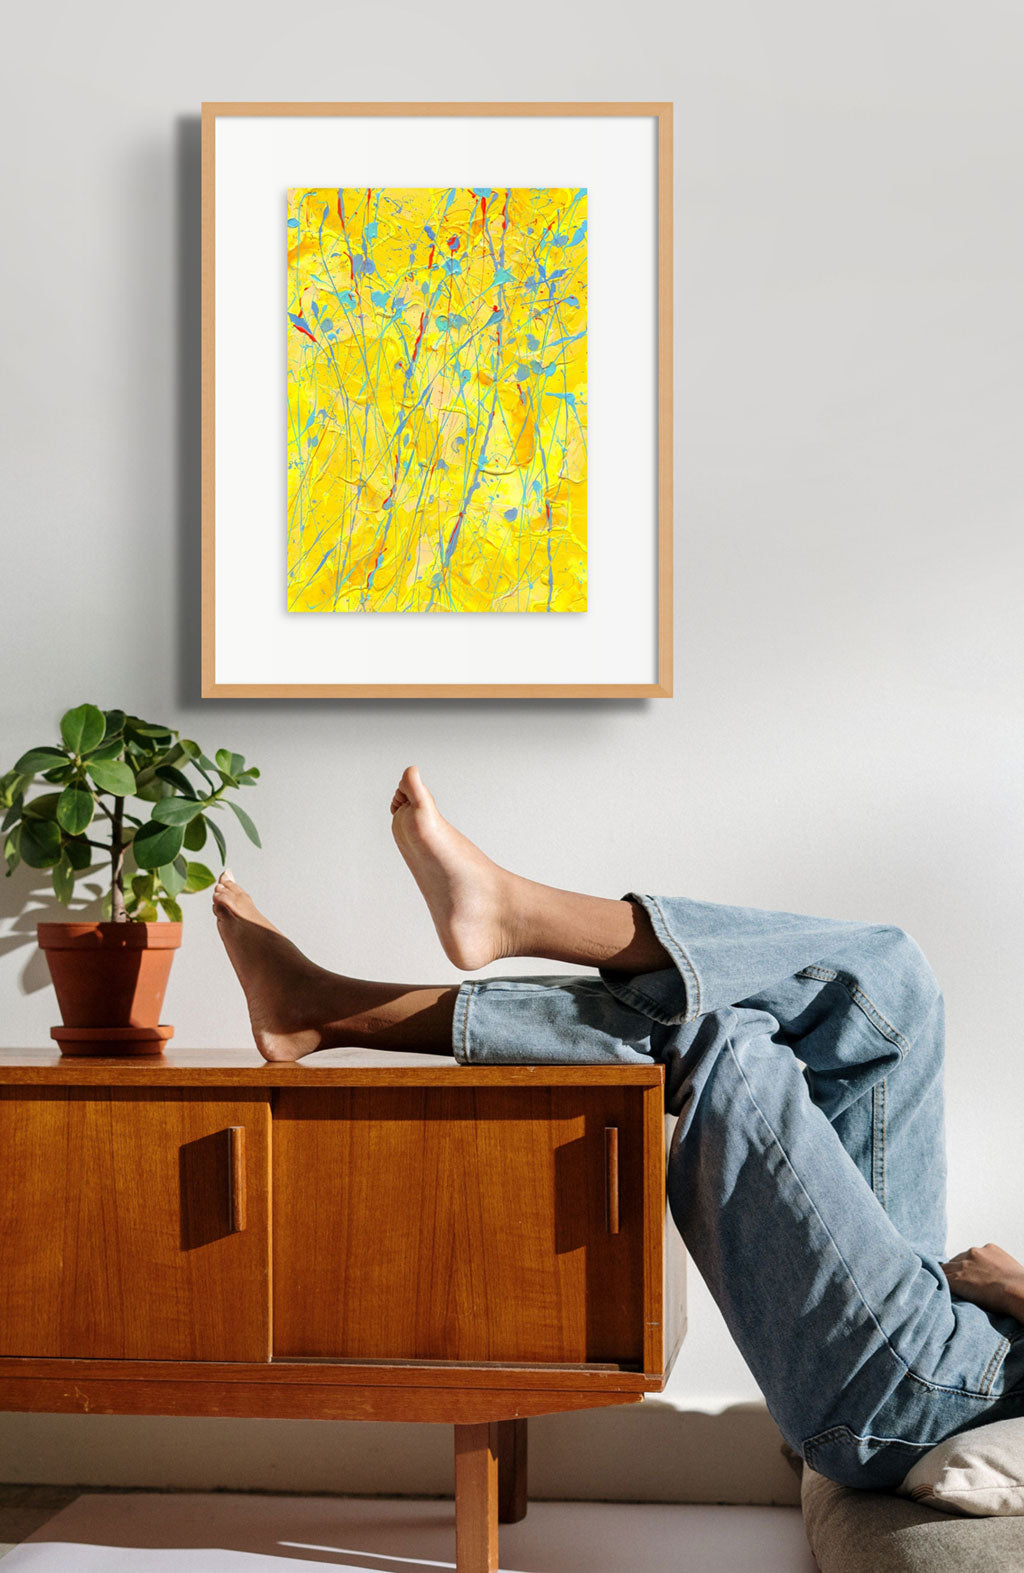 ;Sunflower' original painting, contemporary abstract art on paper by Bridget Bradley. Seen framed in oak hanging in situ above wooden console with person in jeans and feet up.